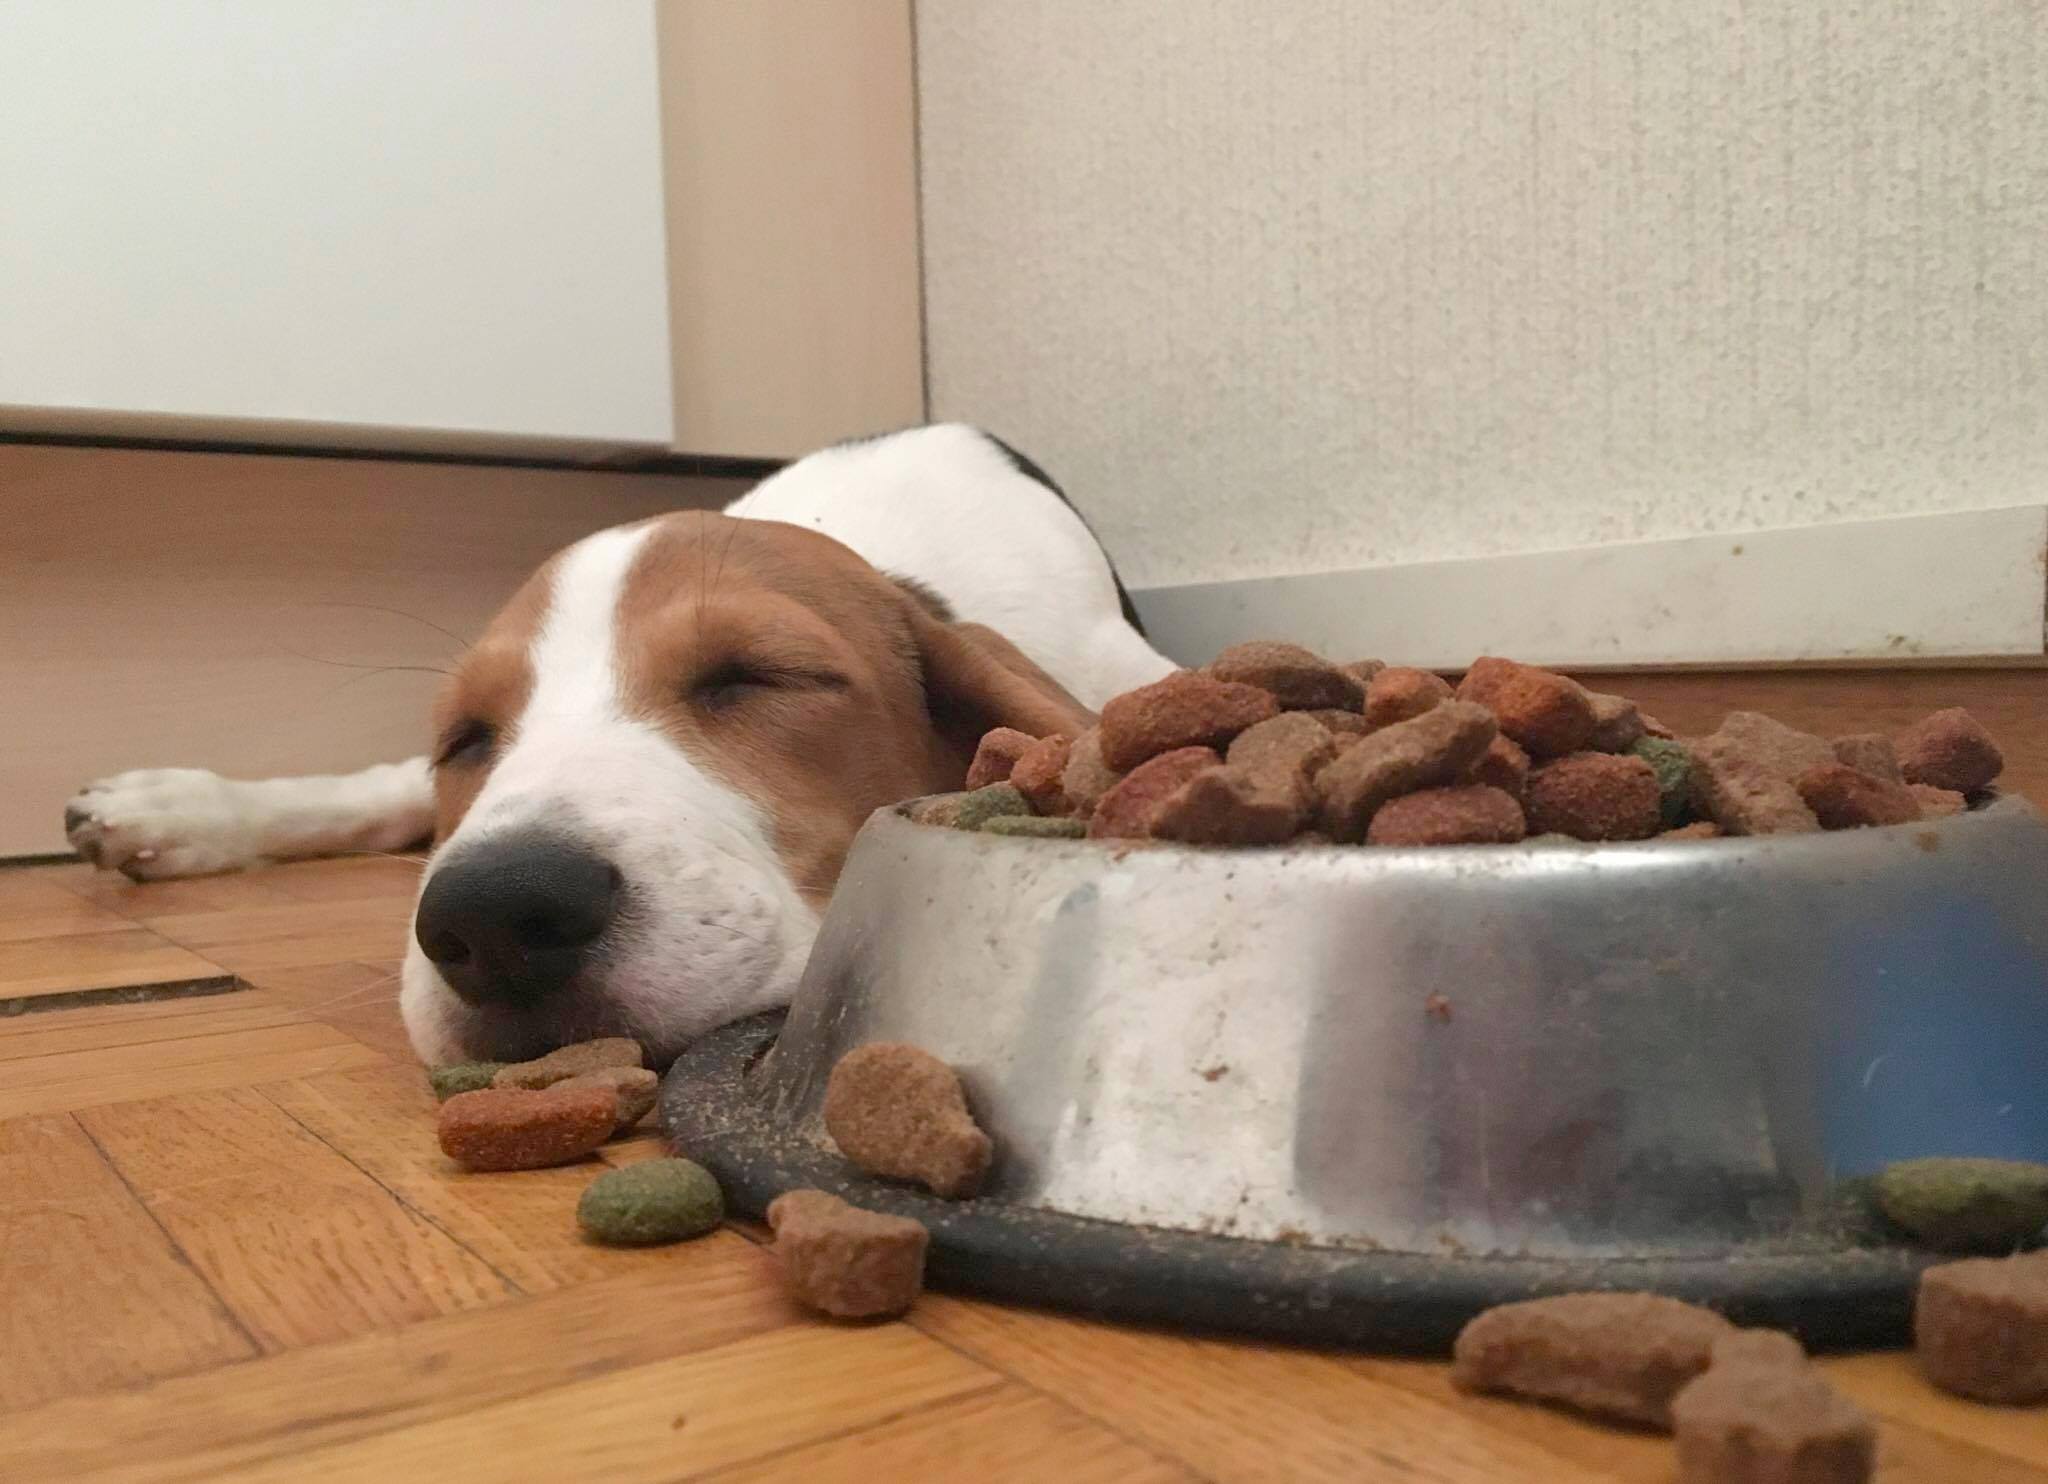 A Beagle sleeping on the floor next to a spilled bowl of dog food